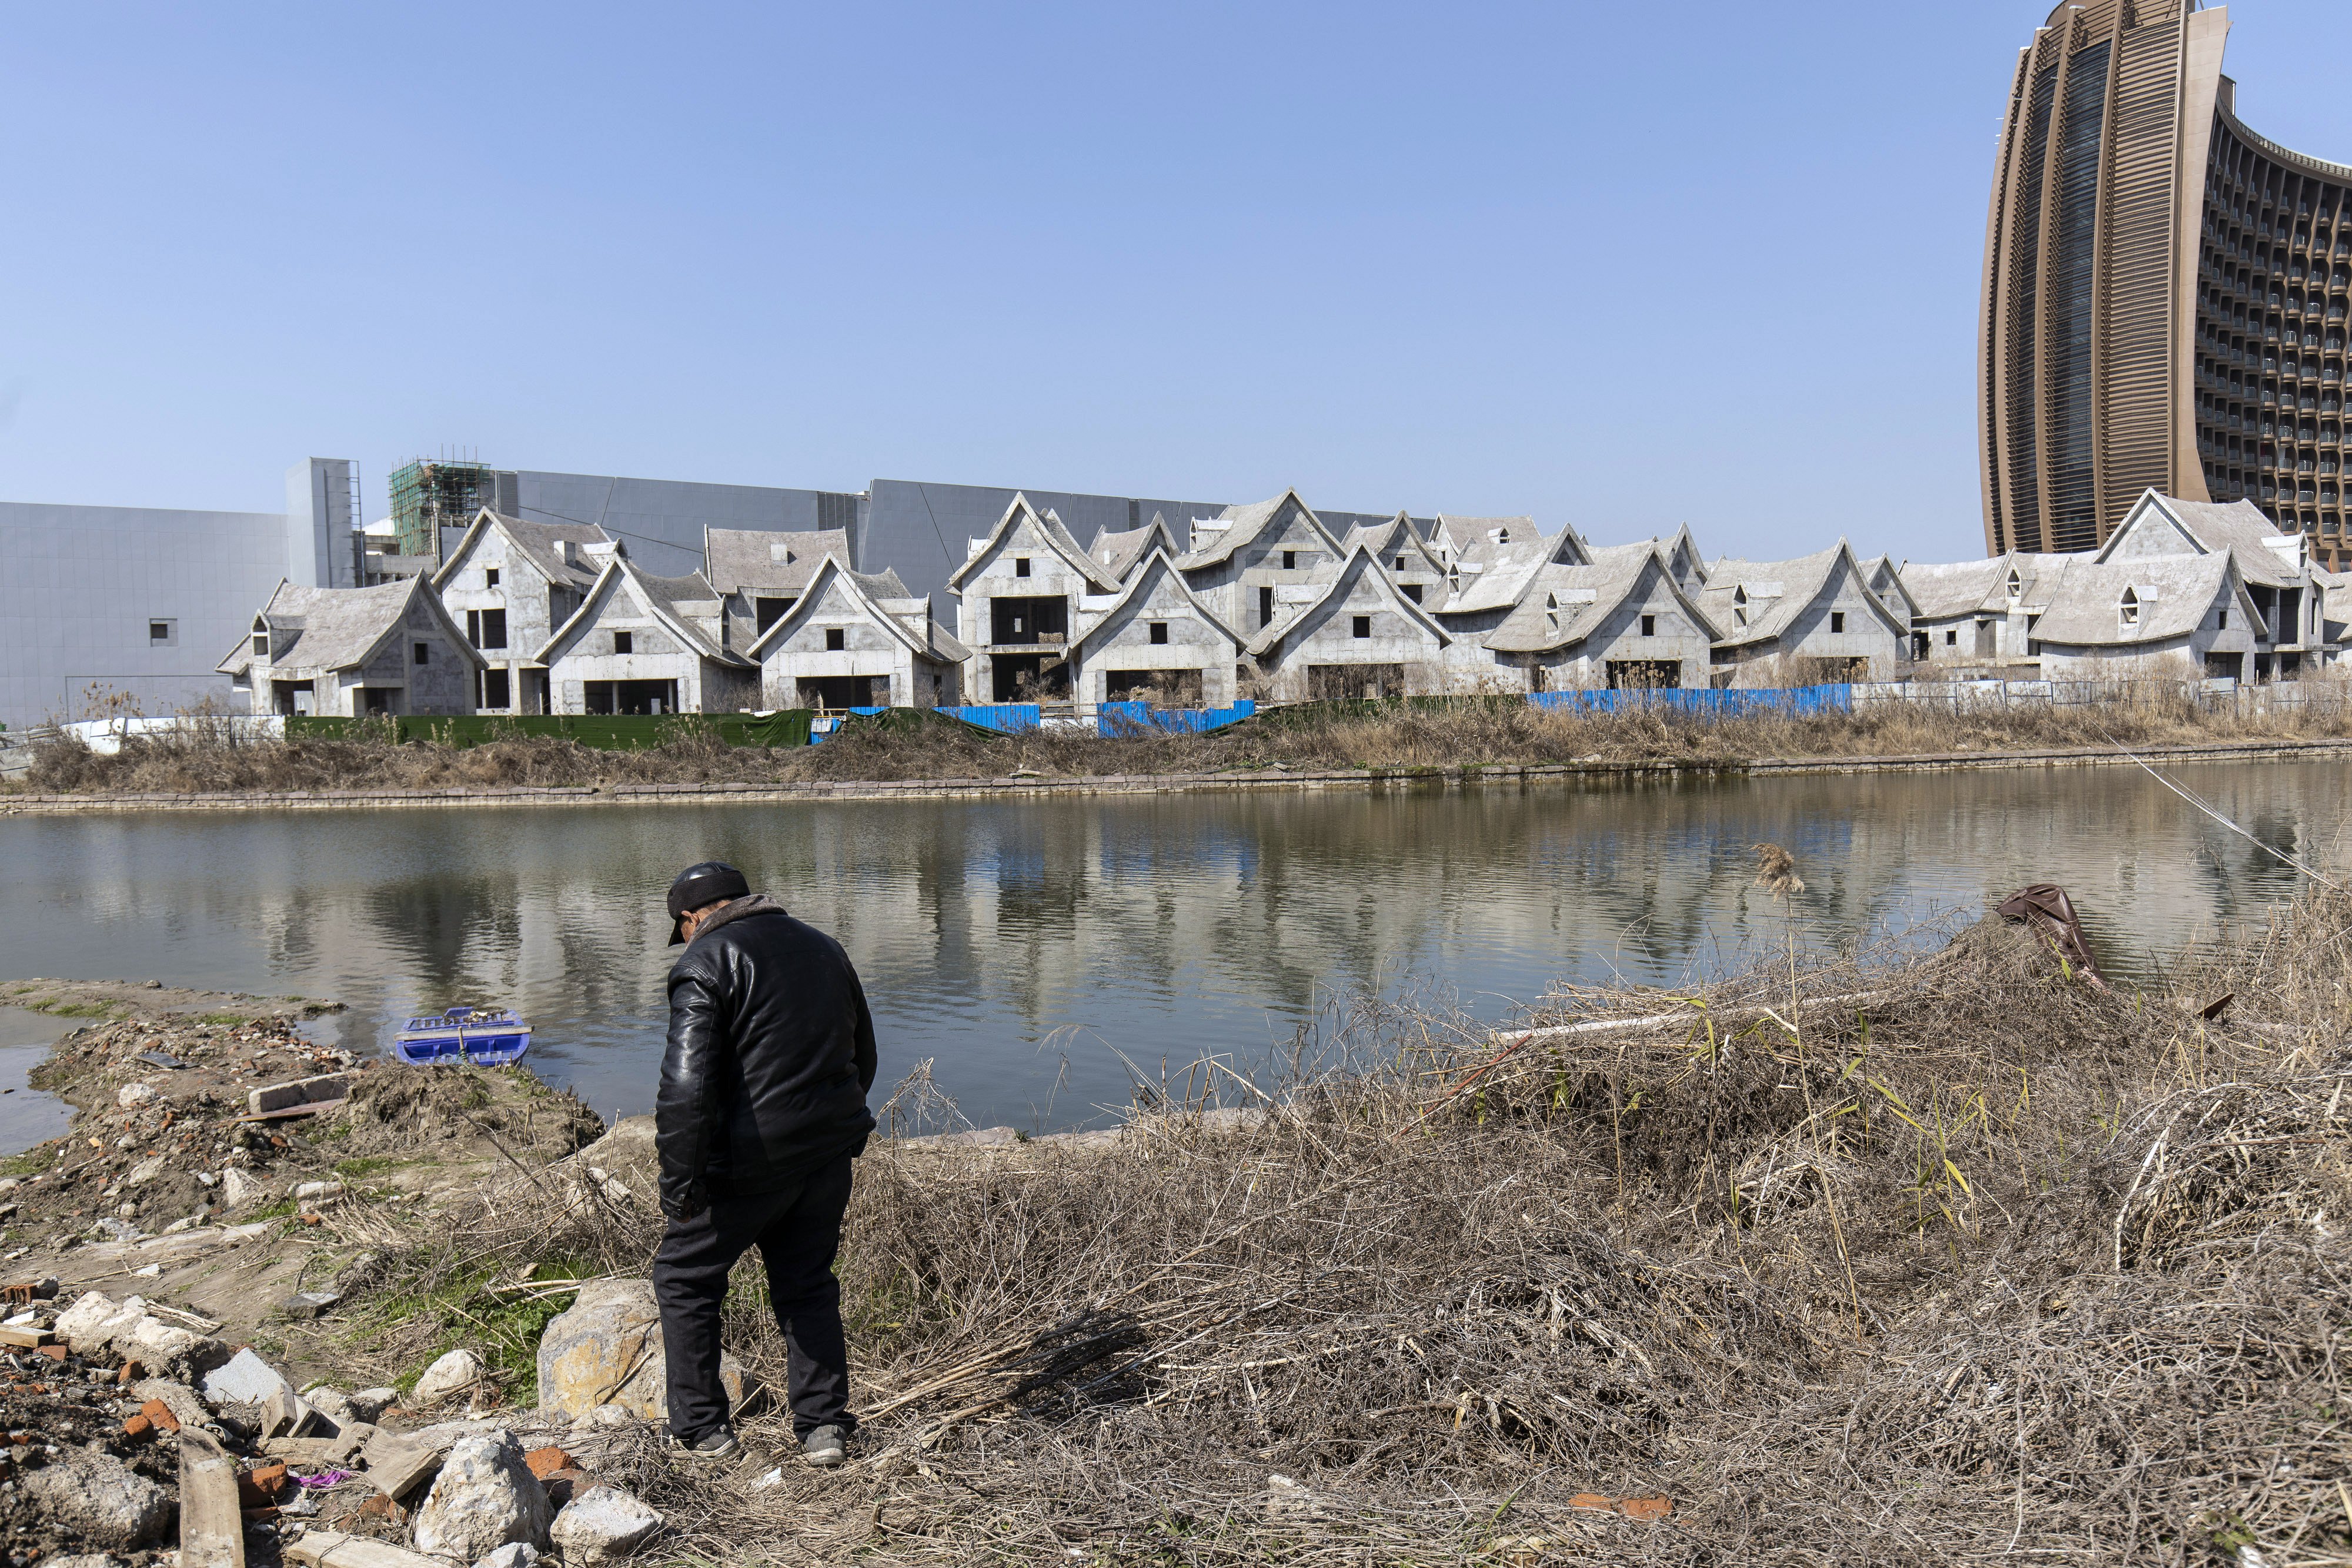 The Sunac Resort project is seen under construction in Haiyan, Zhejiang province, on February 25. Rapid property price rises have acted as an amplifier of wealth inequality in society, making it an impediment to China’s goal of “common prosperity”. Photo: Bloomberg